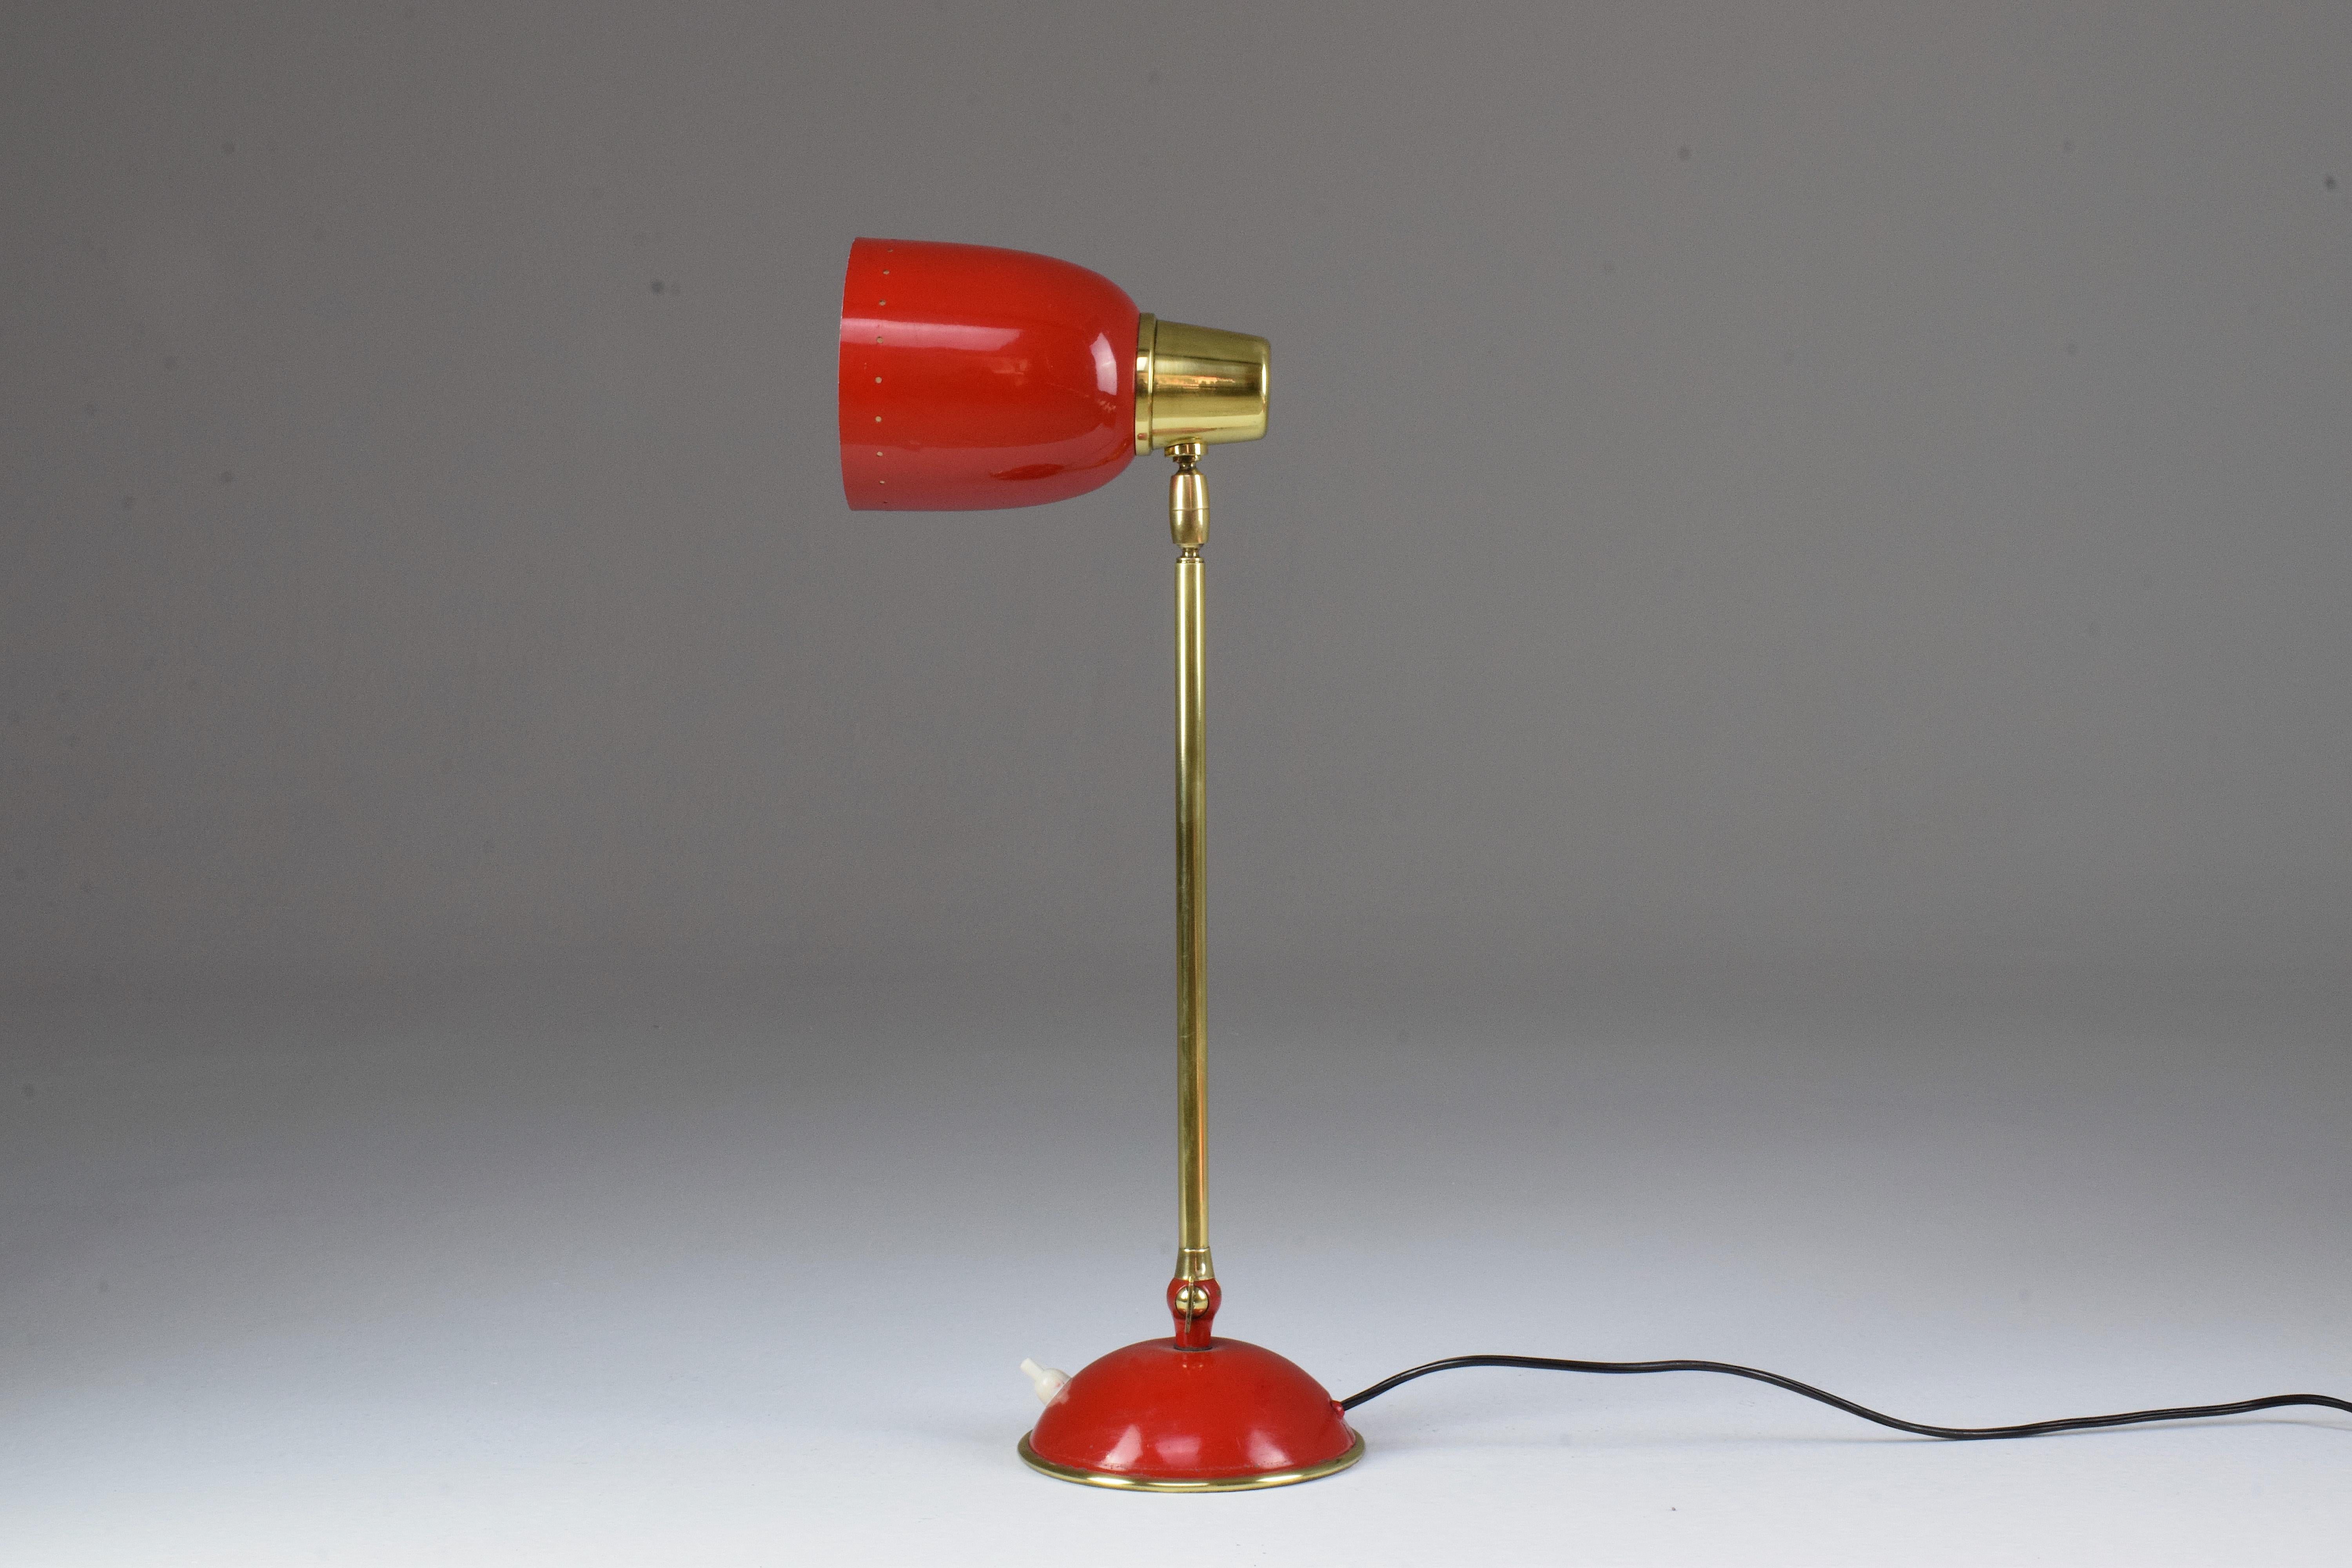 A beautiful 20th-century vintage Italian table or desk lamp designed in red lacquered steel with chic brass details. This statement light articulates at the base and the shade. Push-button light switch at the base.
In the style of Stilnovo.
Italy,